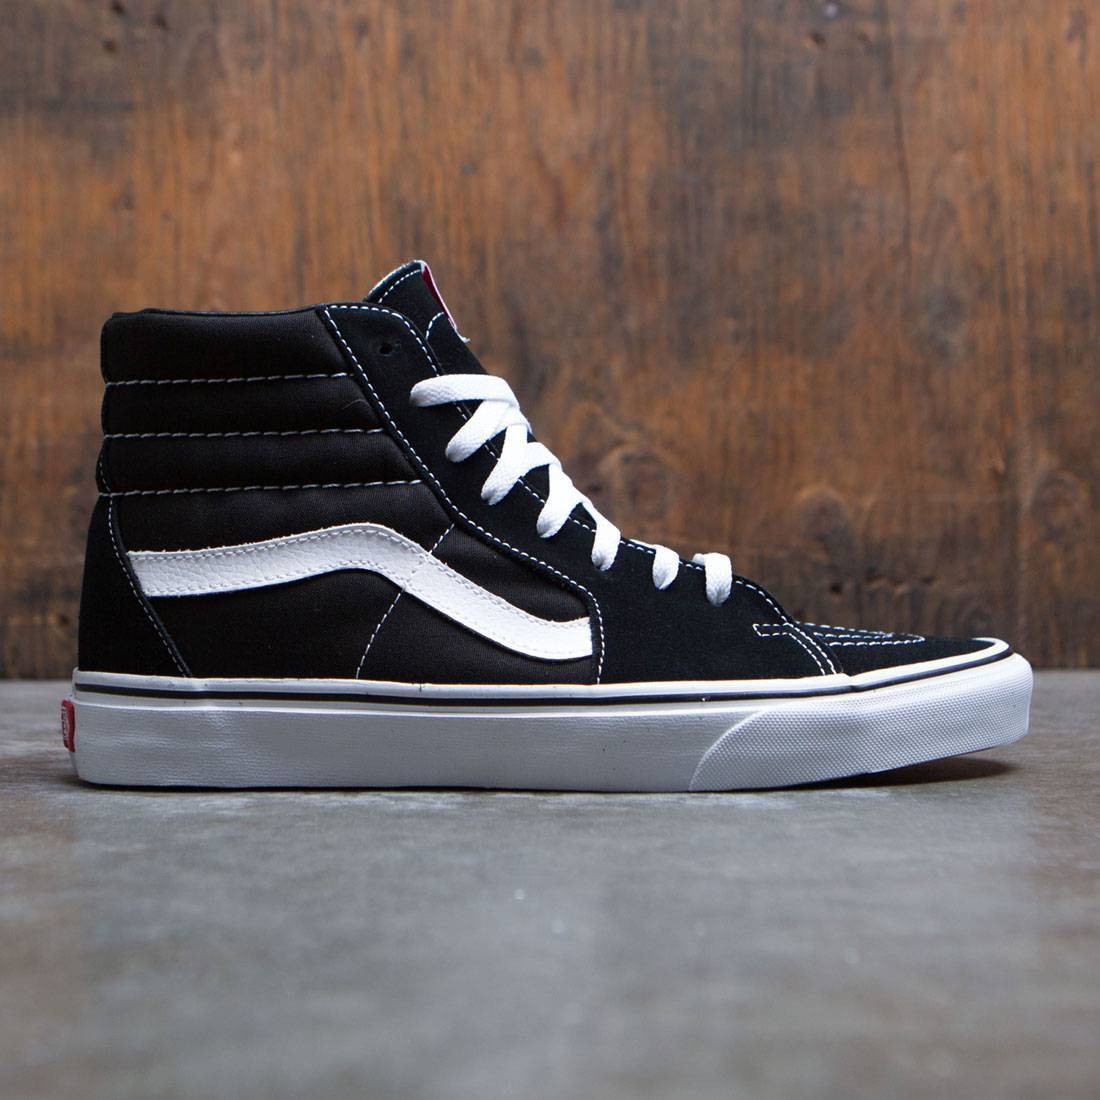 mens black and white high top vans